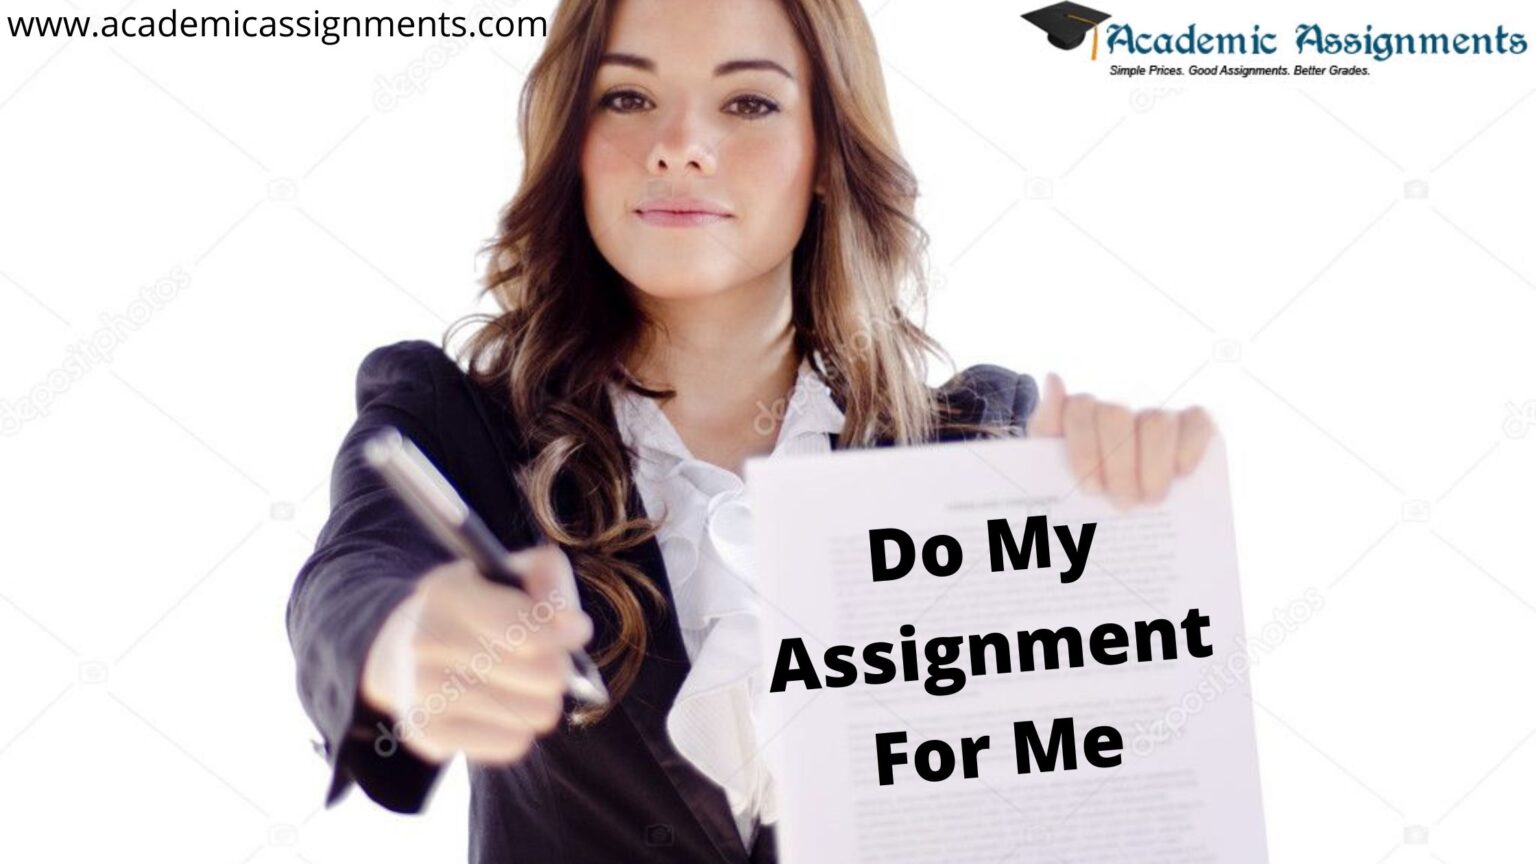 i will check and do my assignment regularly